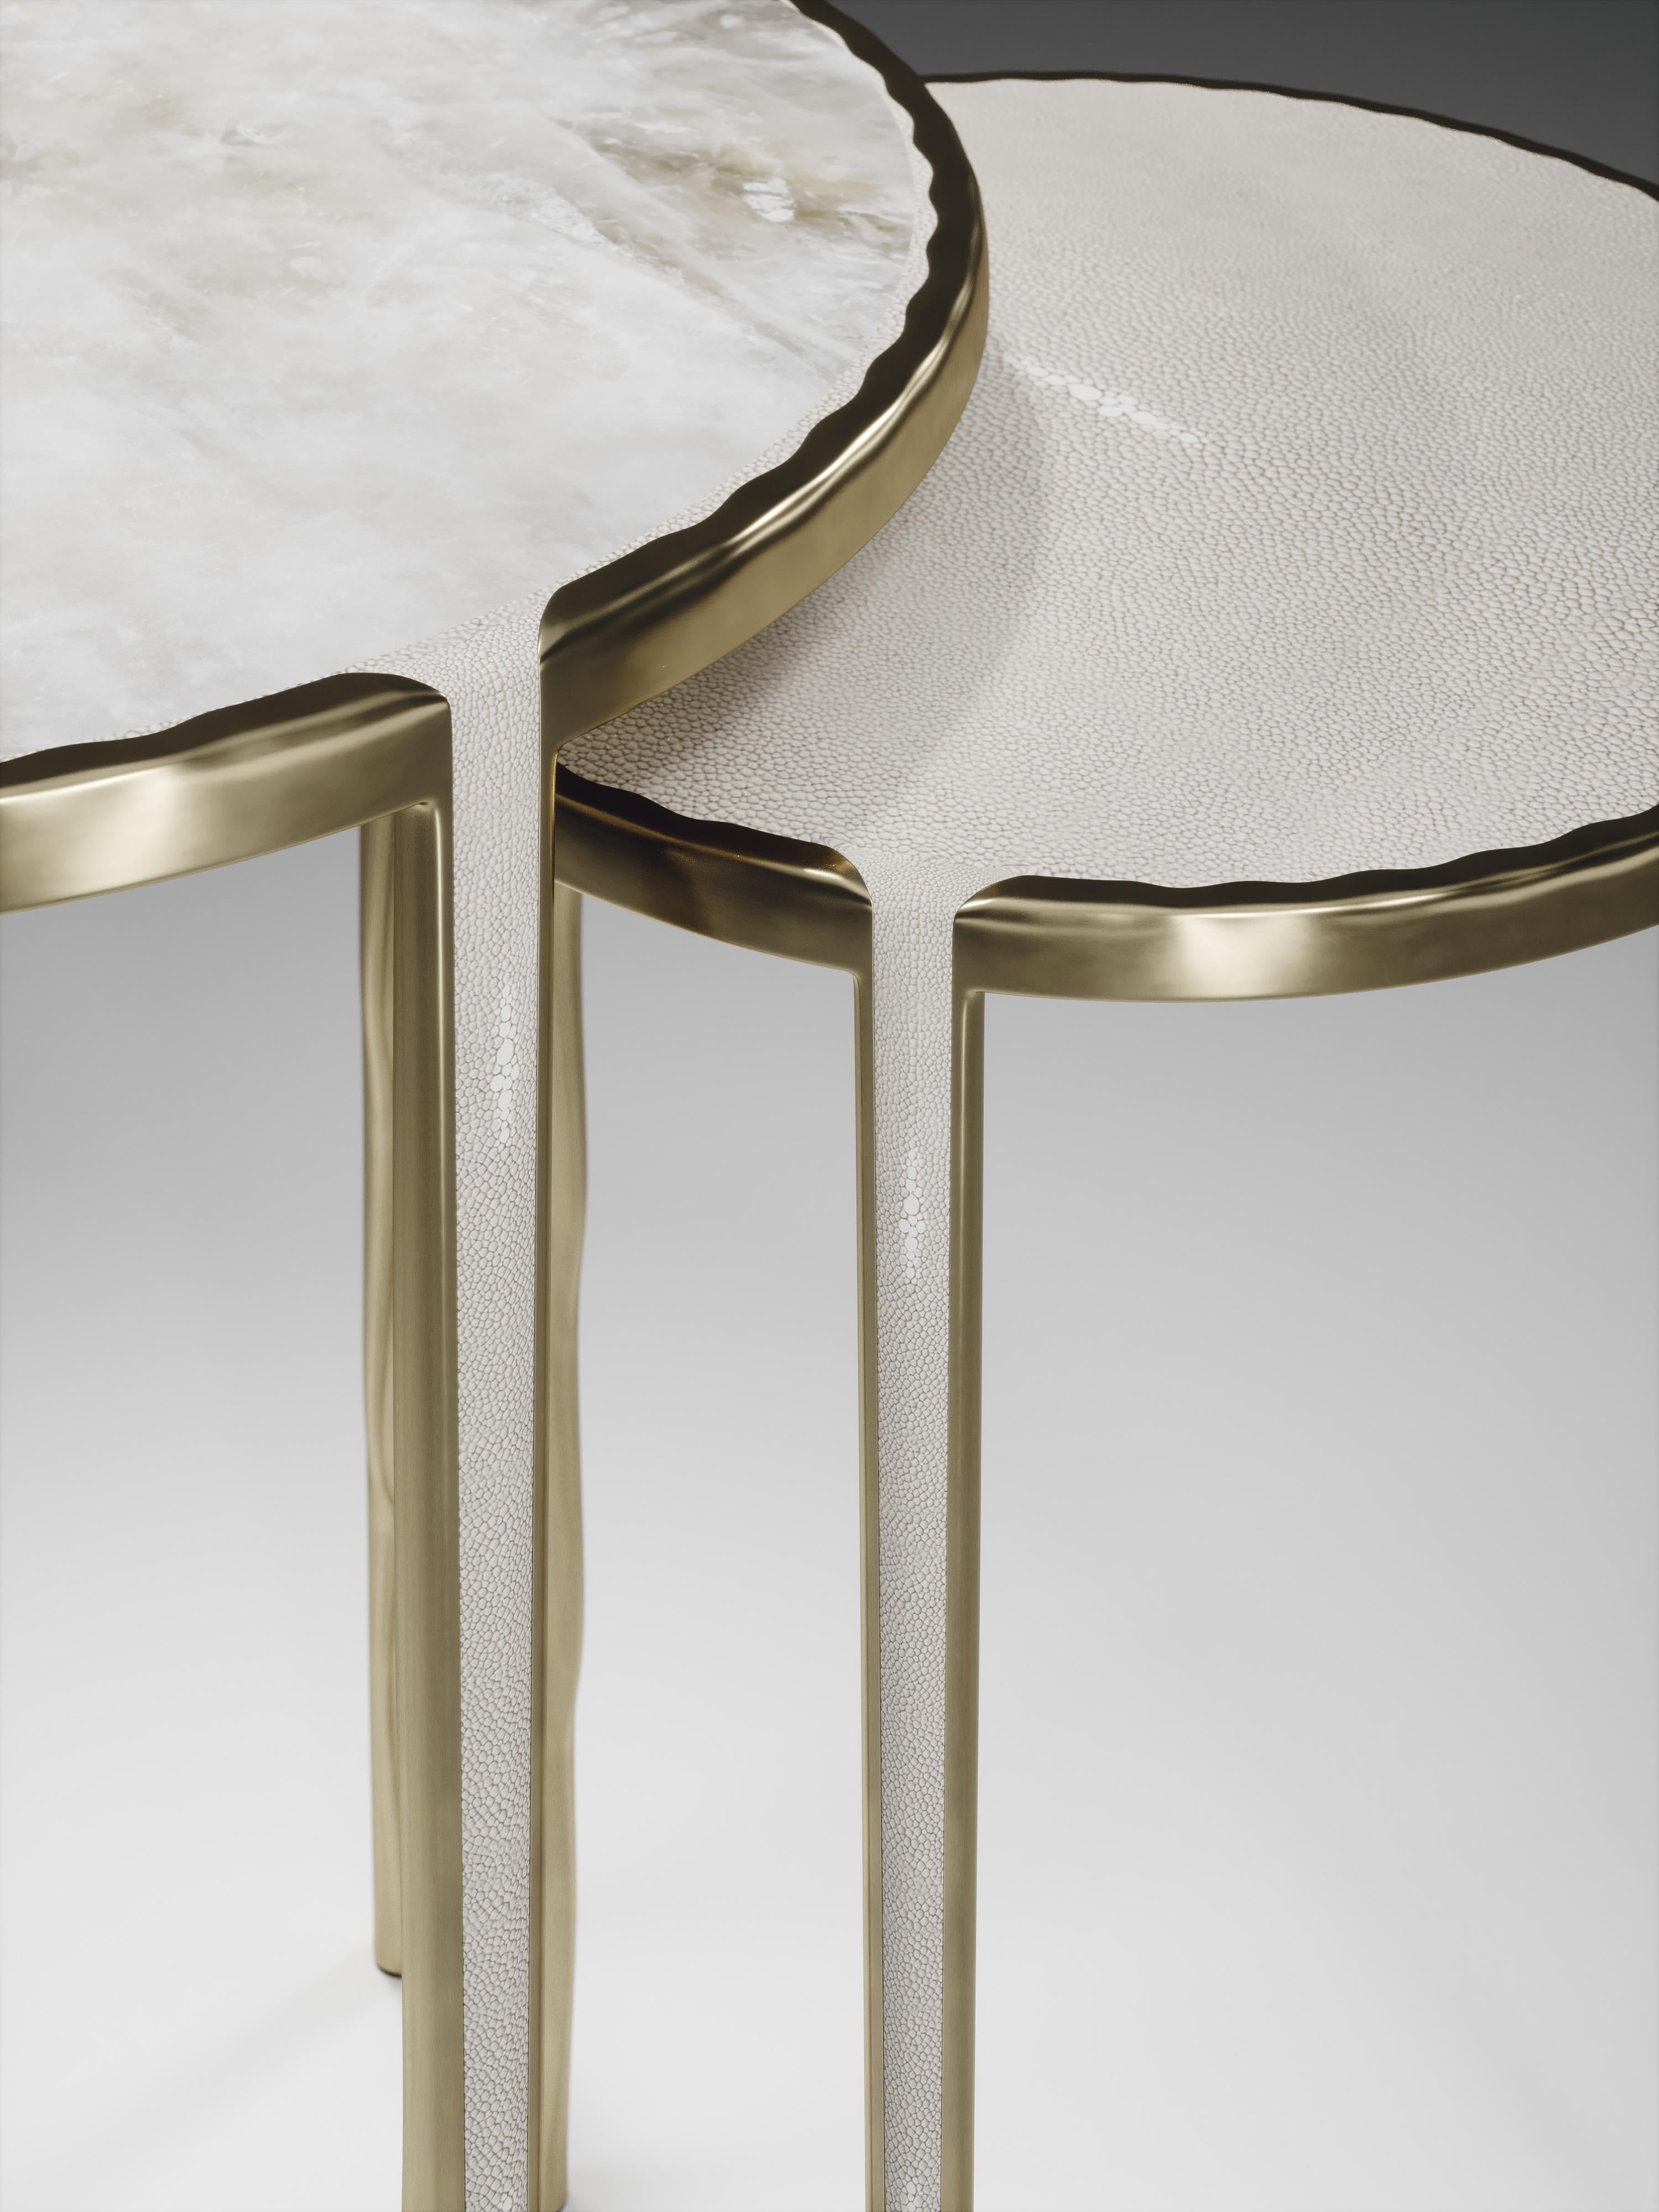 The set of 2 round melting nesting side tables, are the perfect accent pieces for any living space. These are sold as a set of 2 to create elegant and geometric shapes, but one can purchase the tables on their own. The large and medium size are